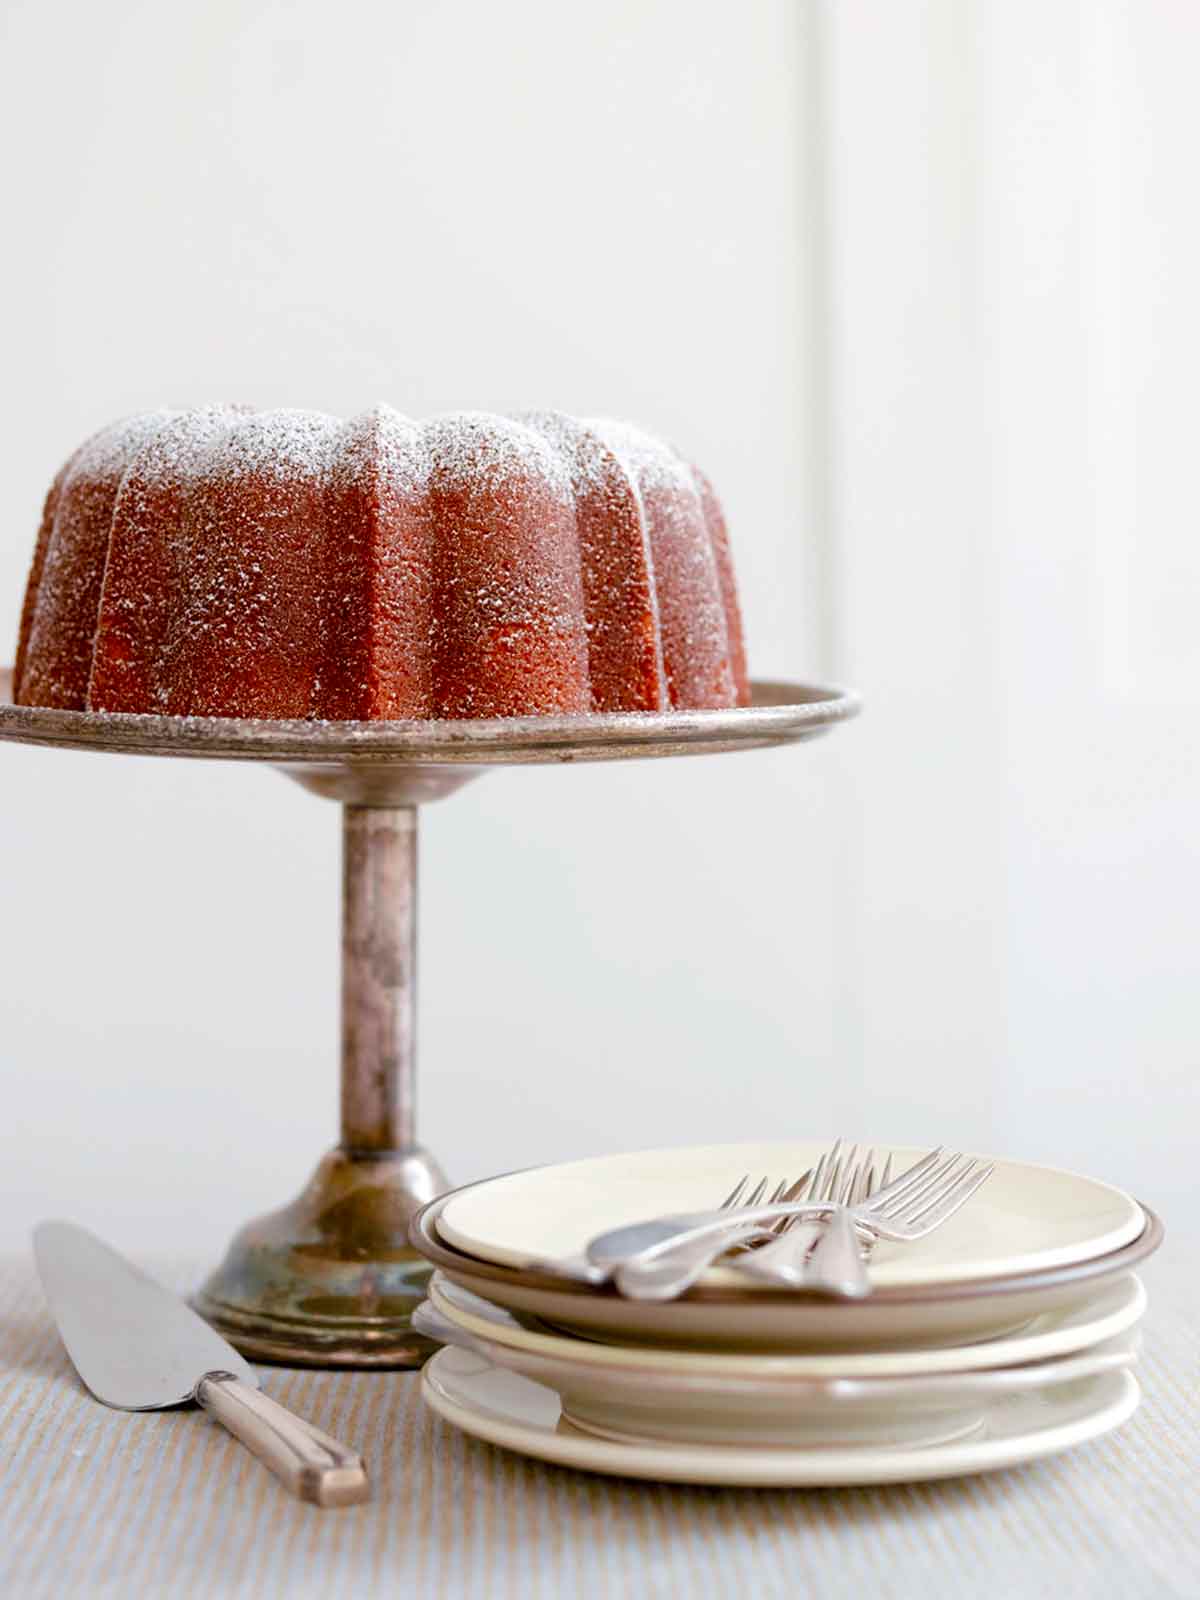 A Portuguese orange olive oil cake, dusted with confectioners' sugar on a silver cake stand.